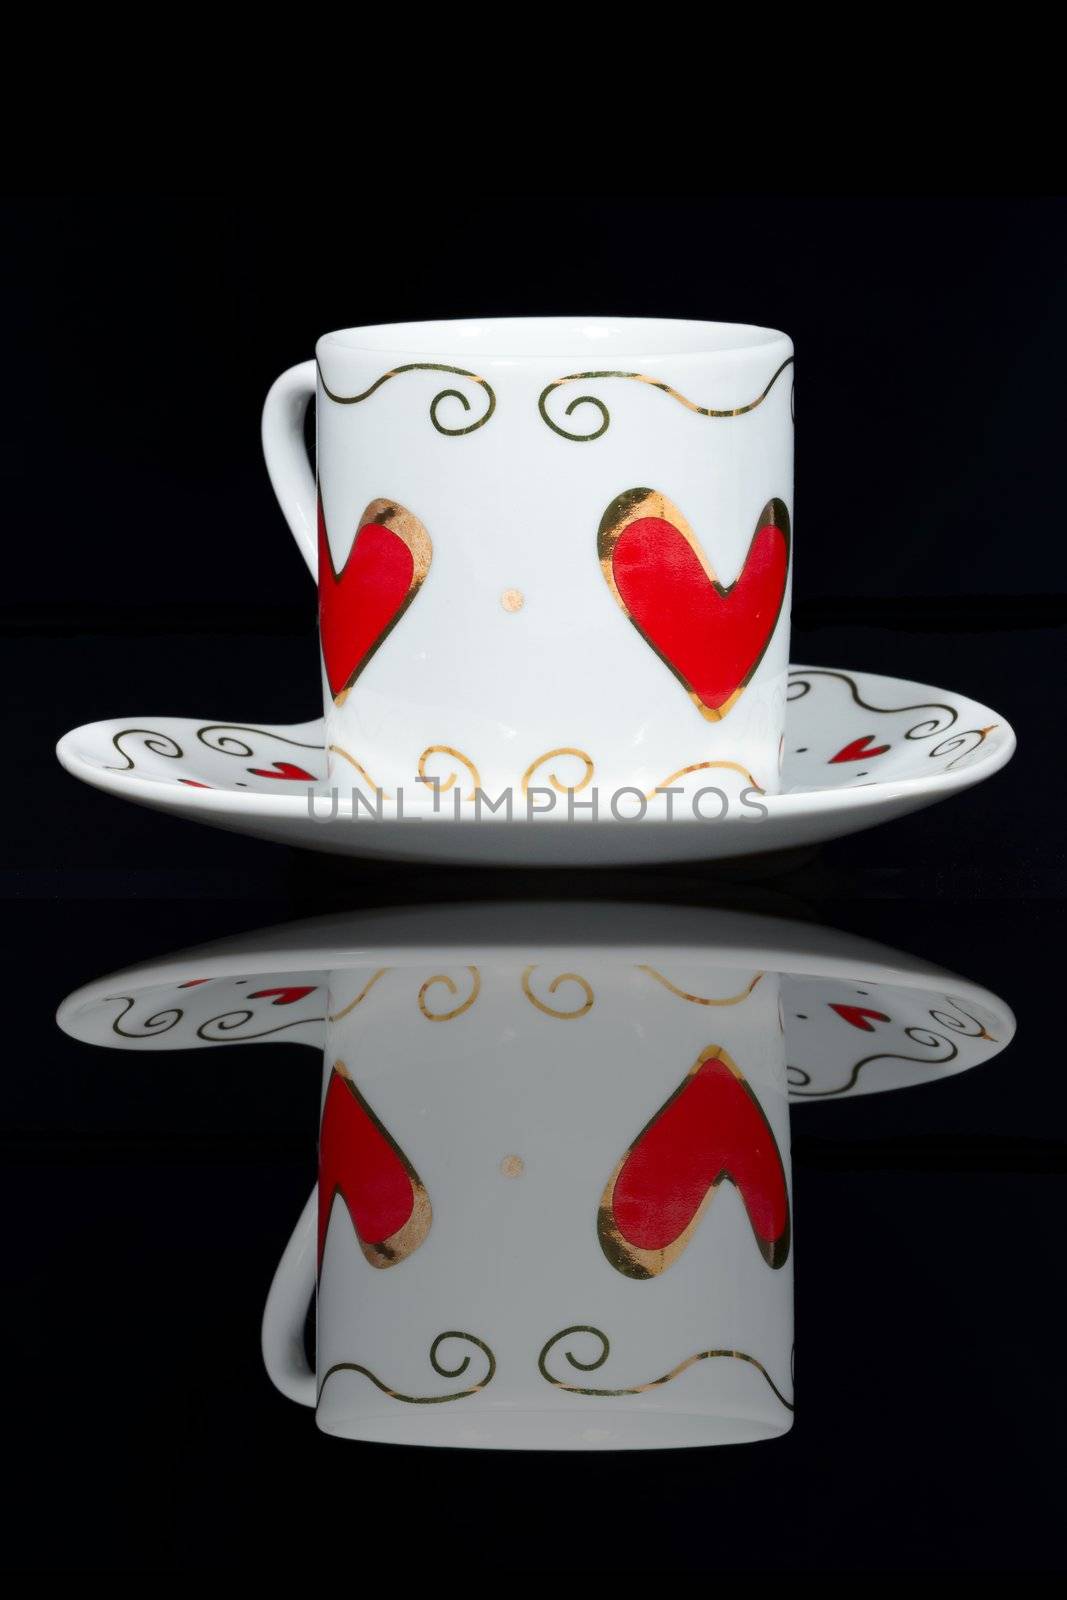 White cup with hearts is a black table, reflected in it.